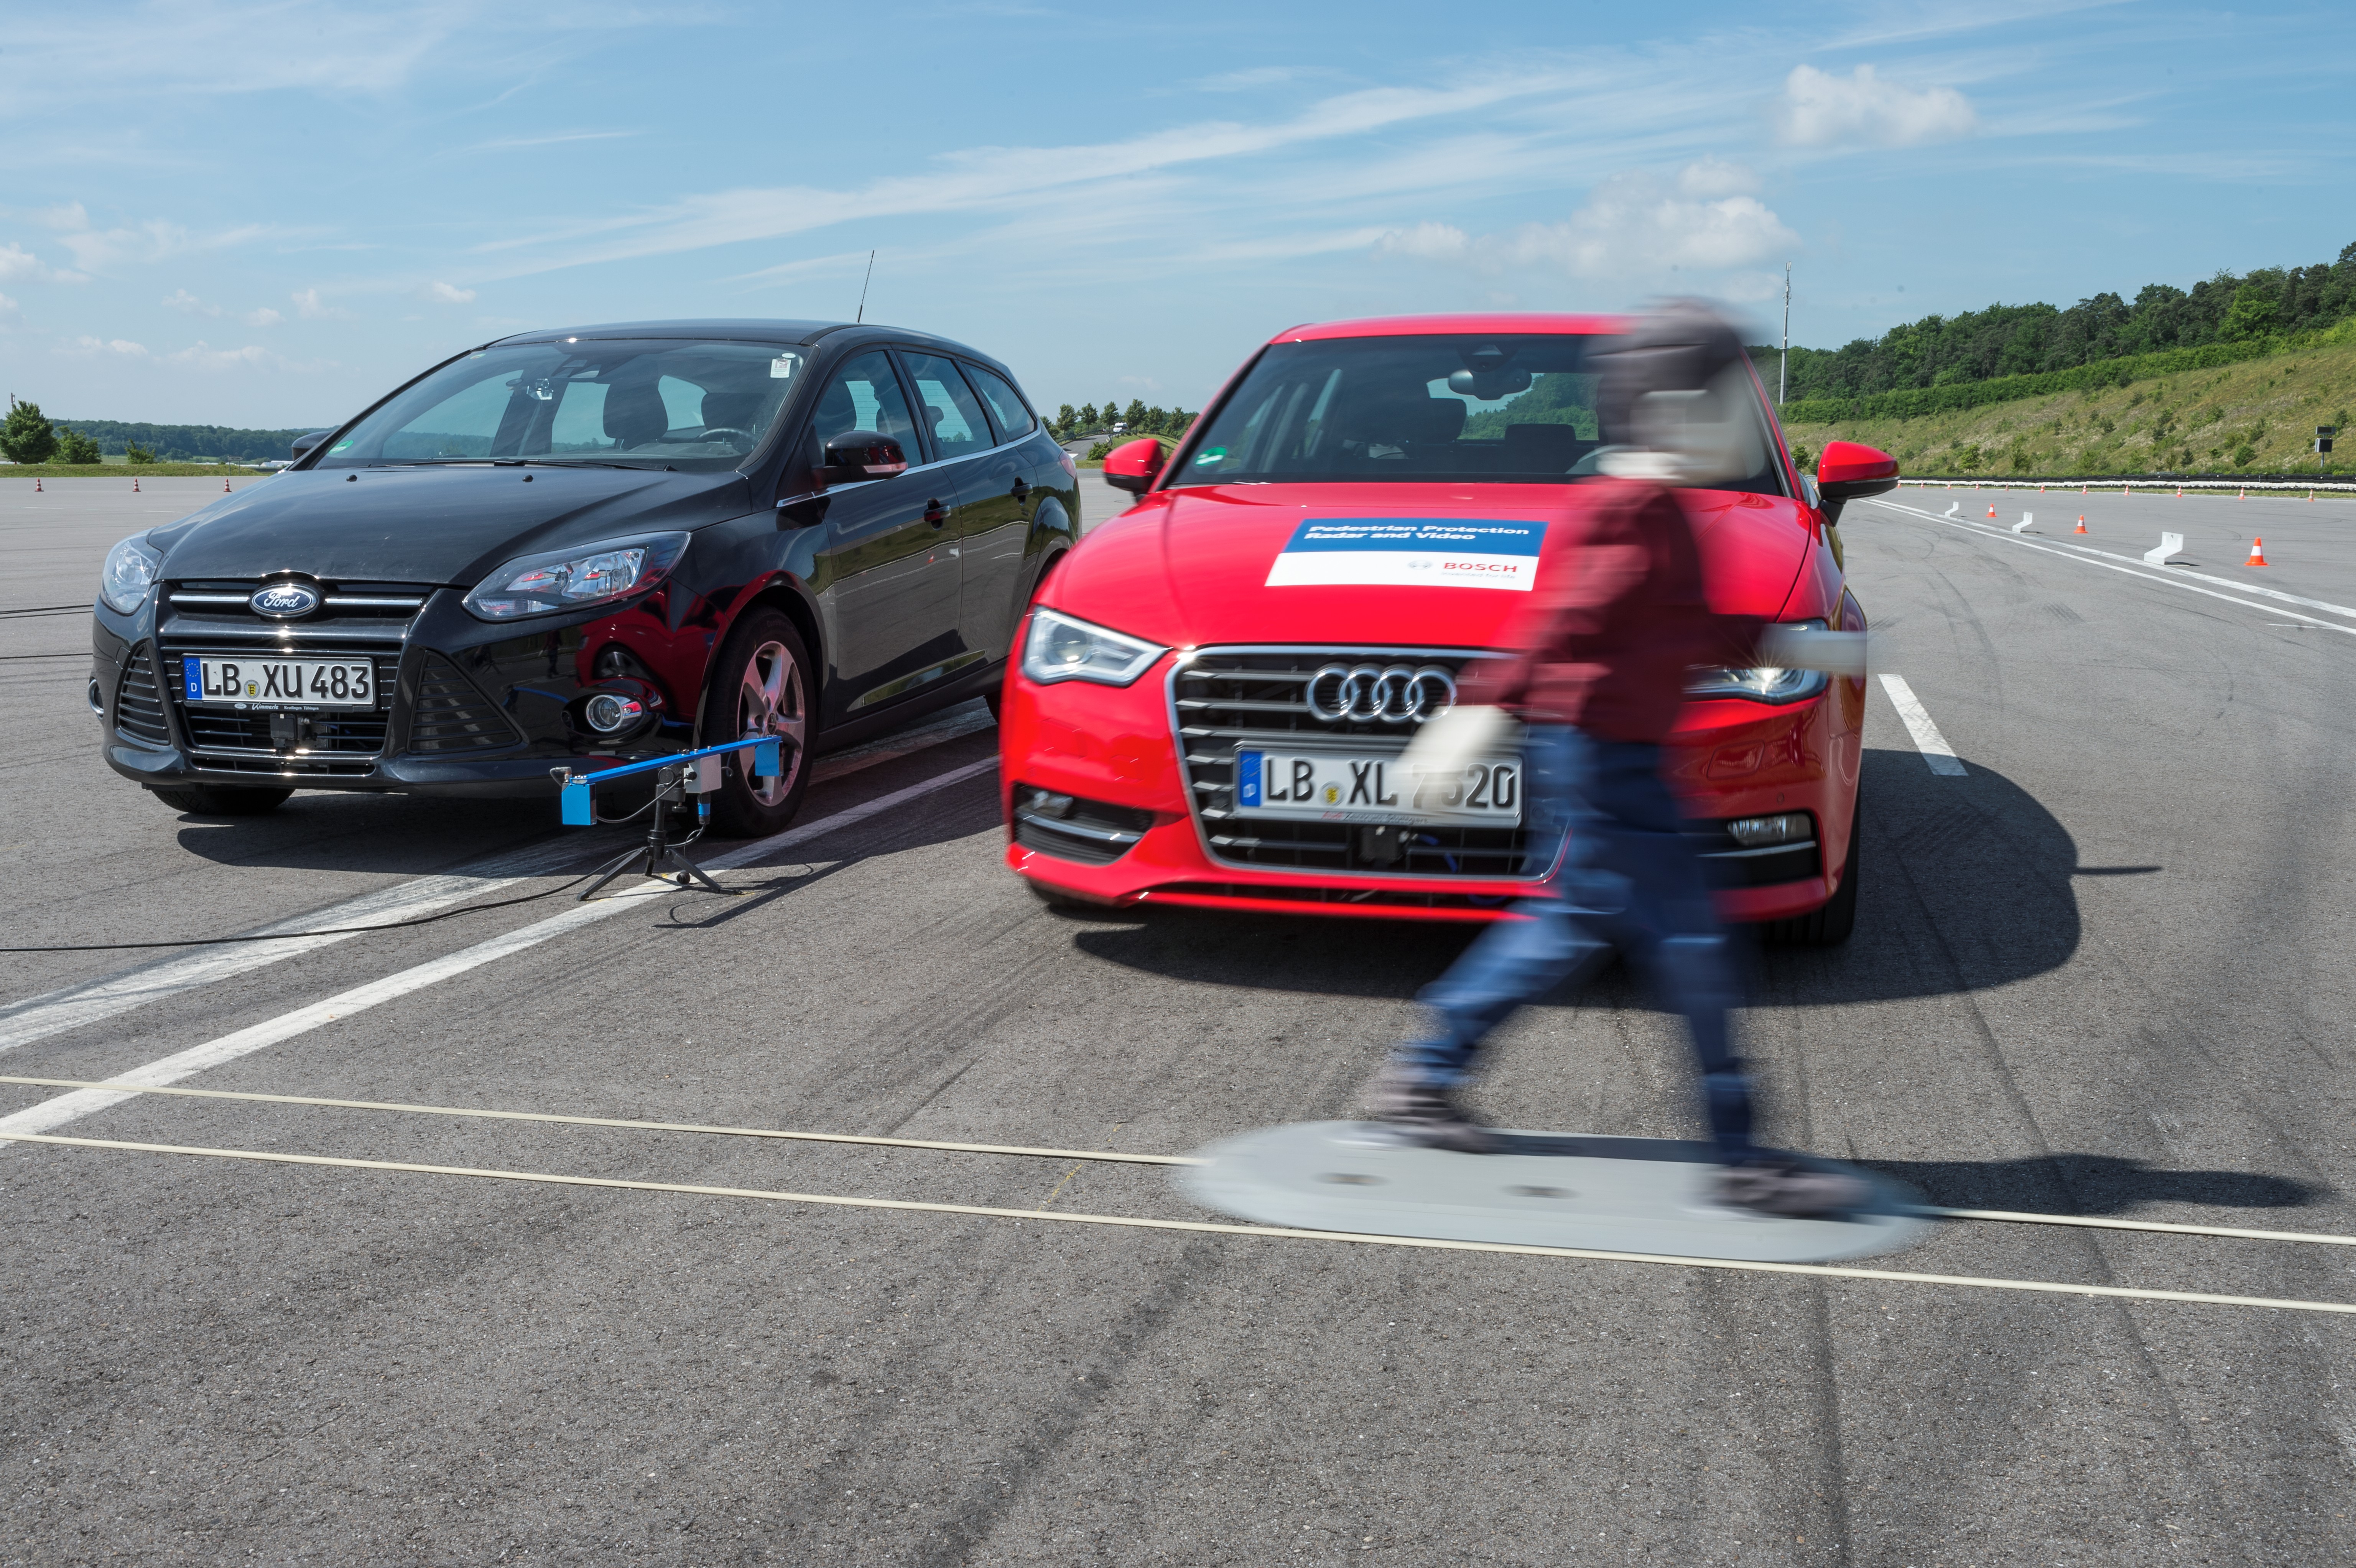 Bosch emergency braking systems protect vulnerable road users